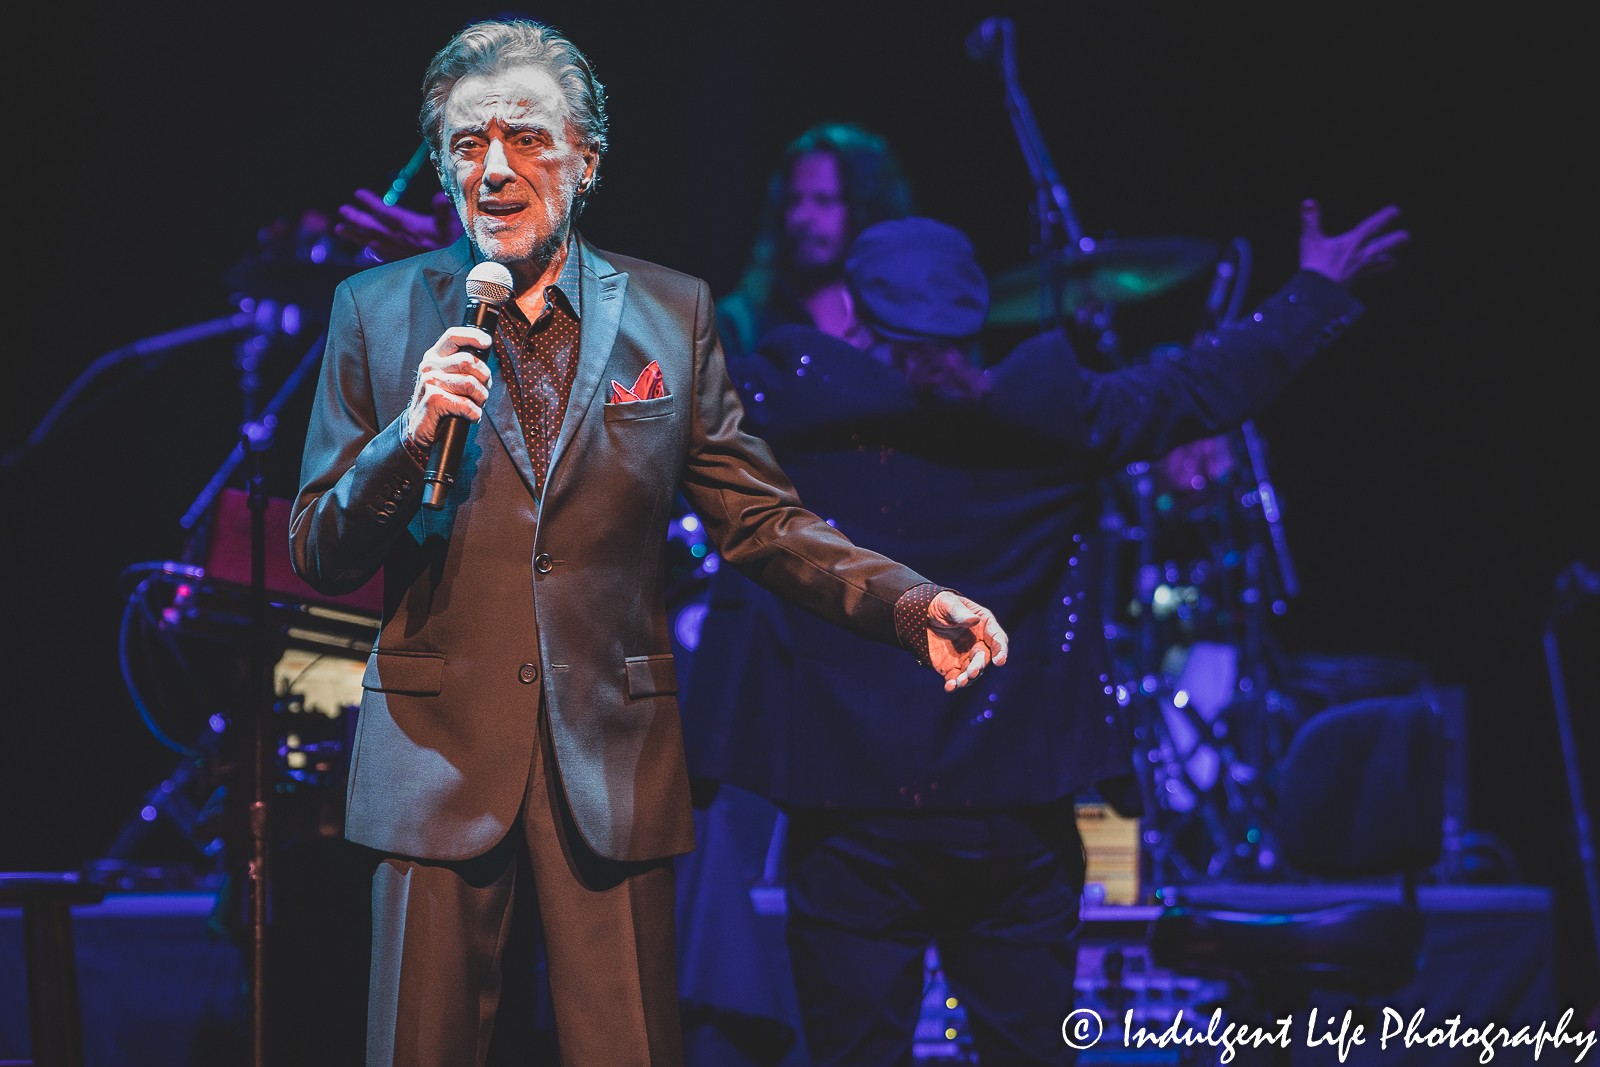 Frankie Valli live in concert with music director Robby Robinson at Muriel Kauffman Theatre in downtown Kansas City, MO on June 4, 2022.